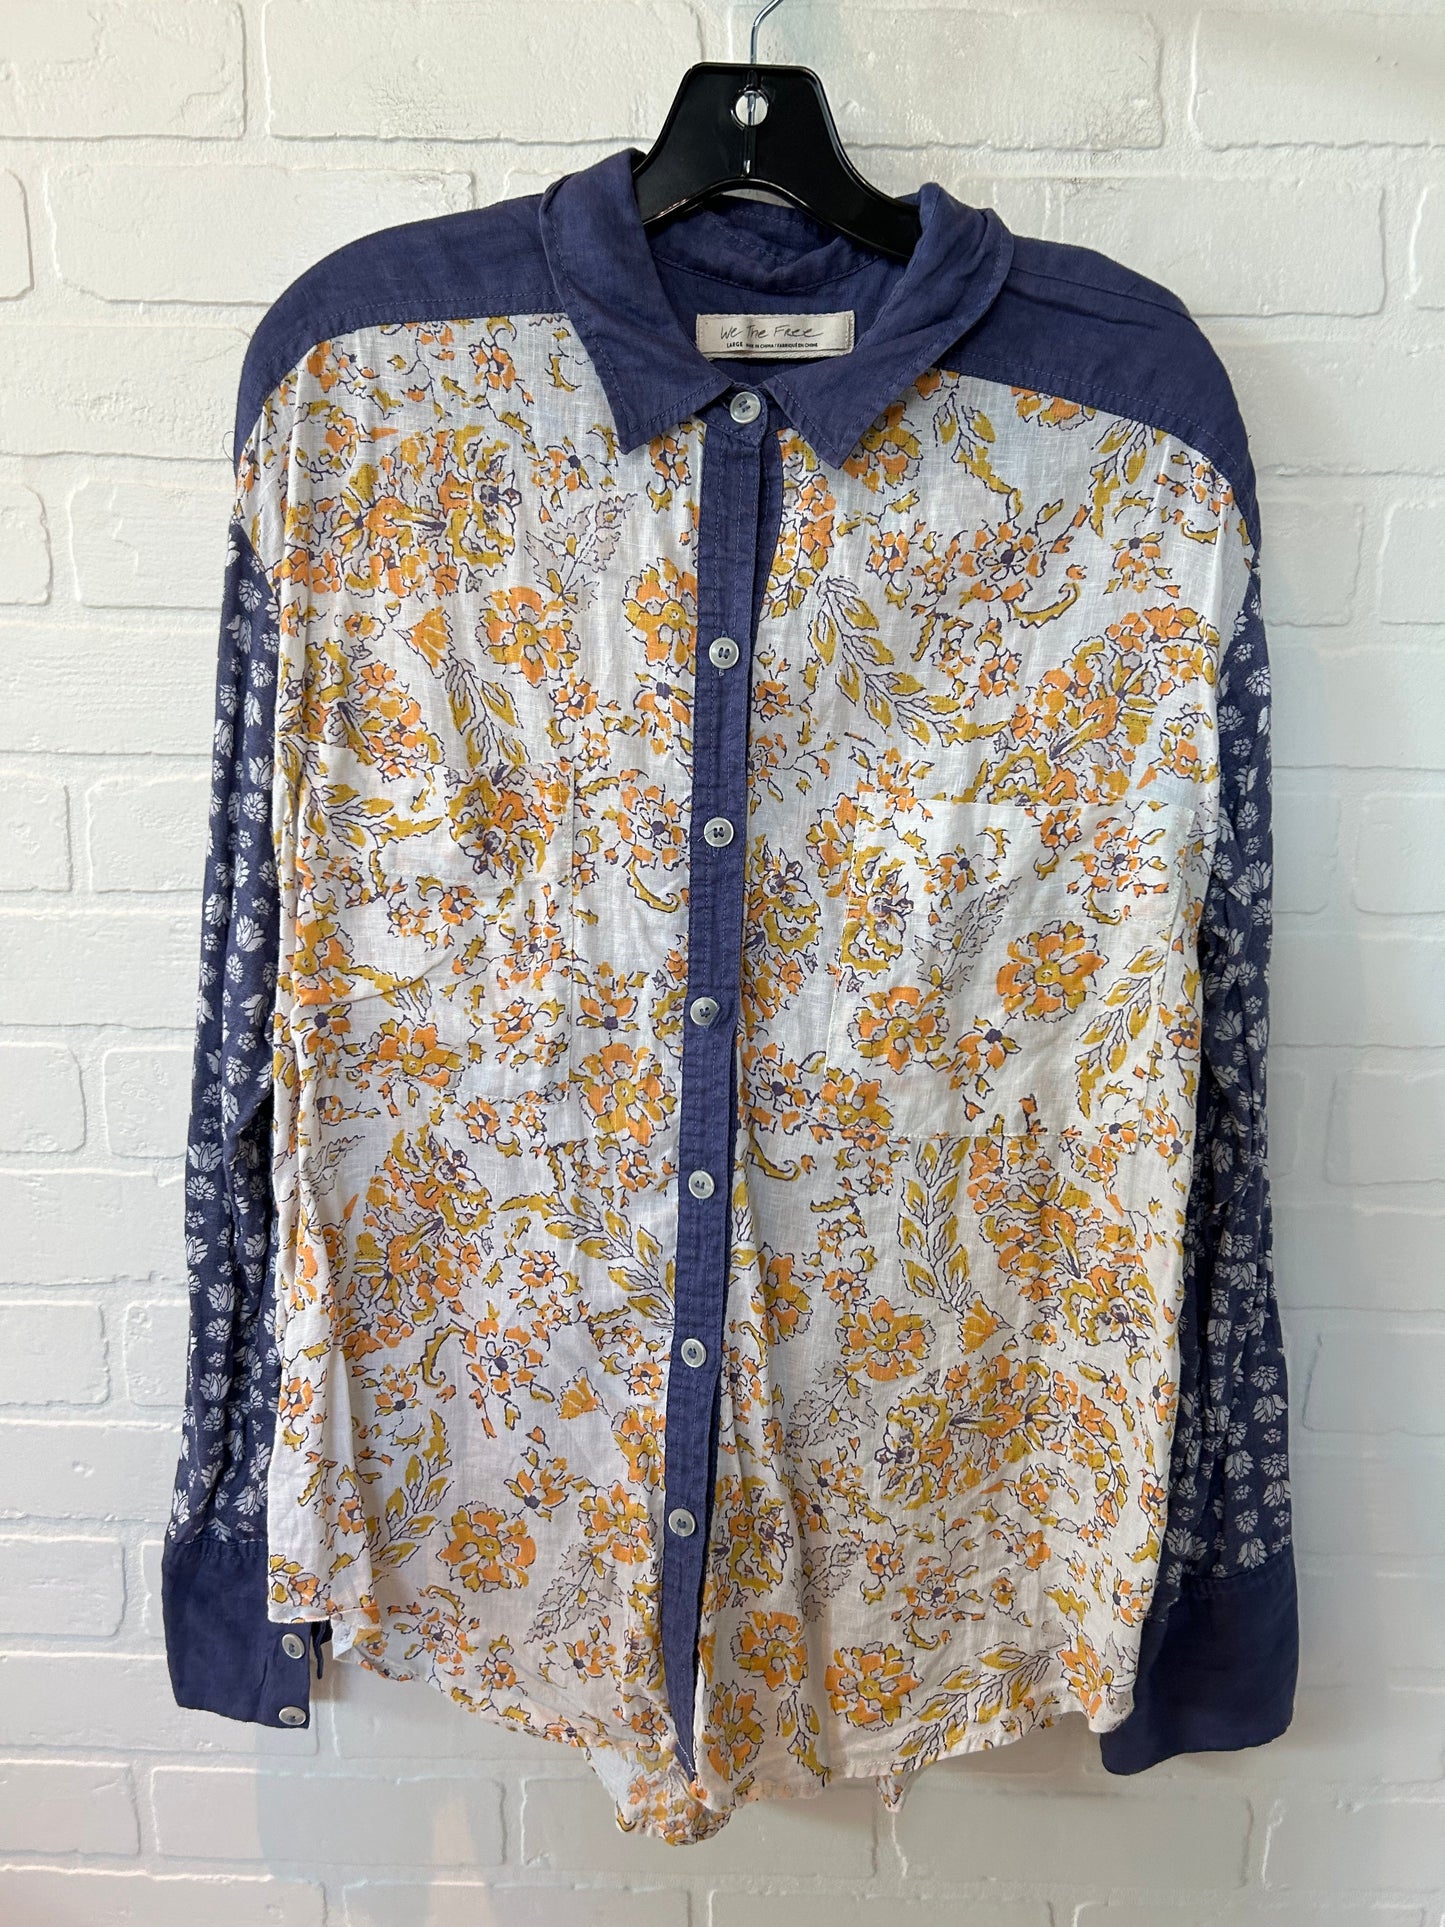 Blue & Yellow Top Long Sleeve We The Free, Size L